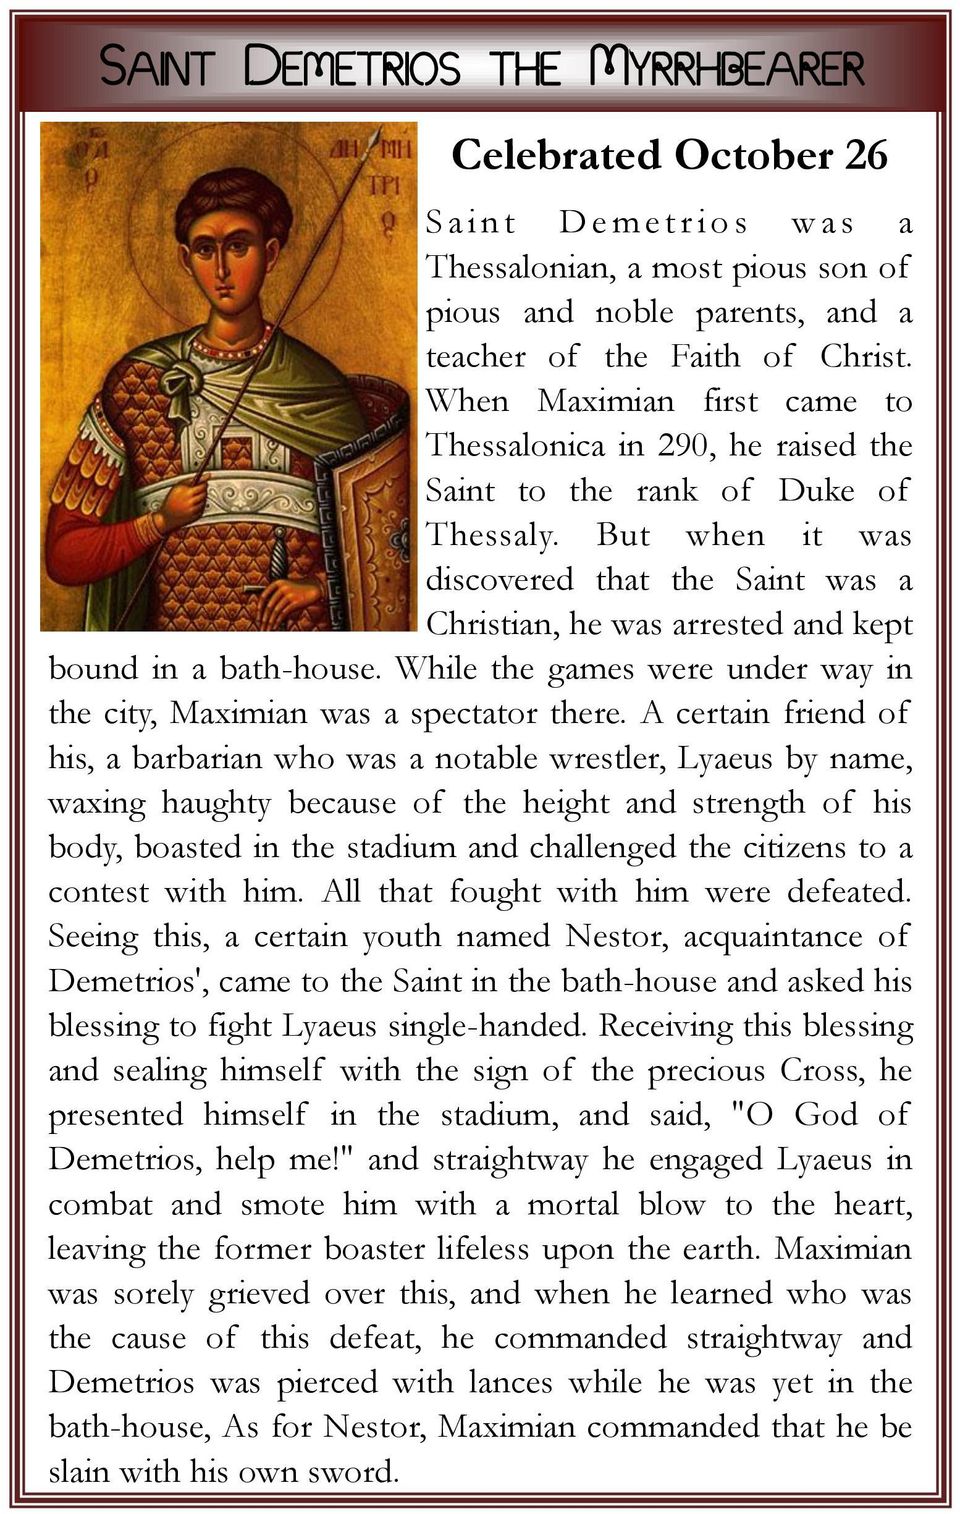 But when it was discovered that the Saint was a Christian, he was arrested and kept bound in a bath-house. While the games were under way in the city, Maximian was a spectator there.